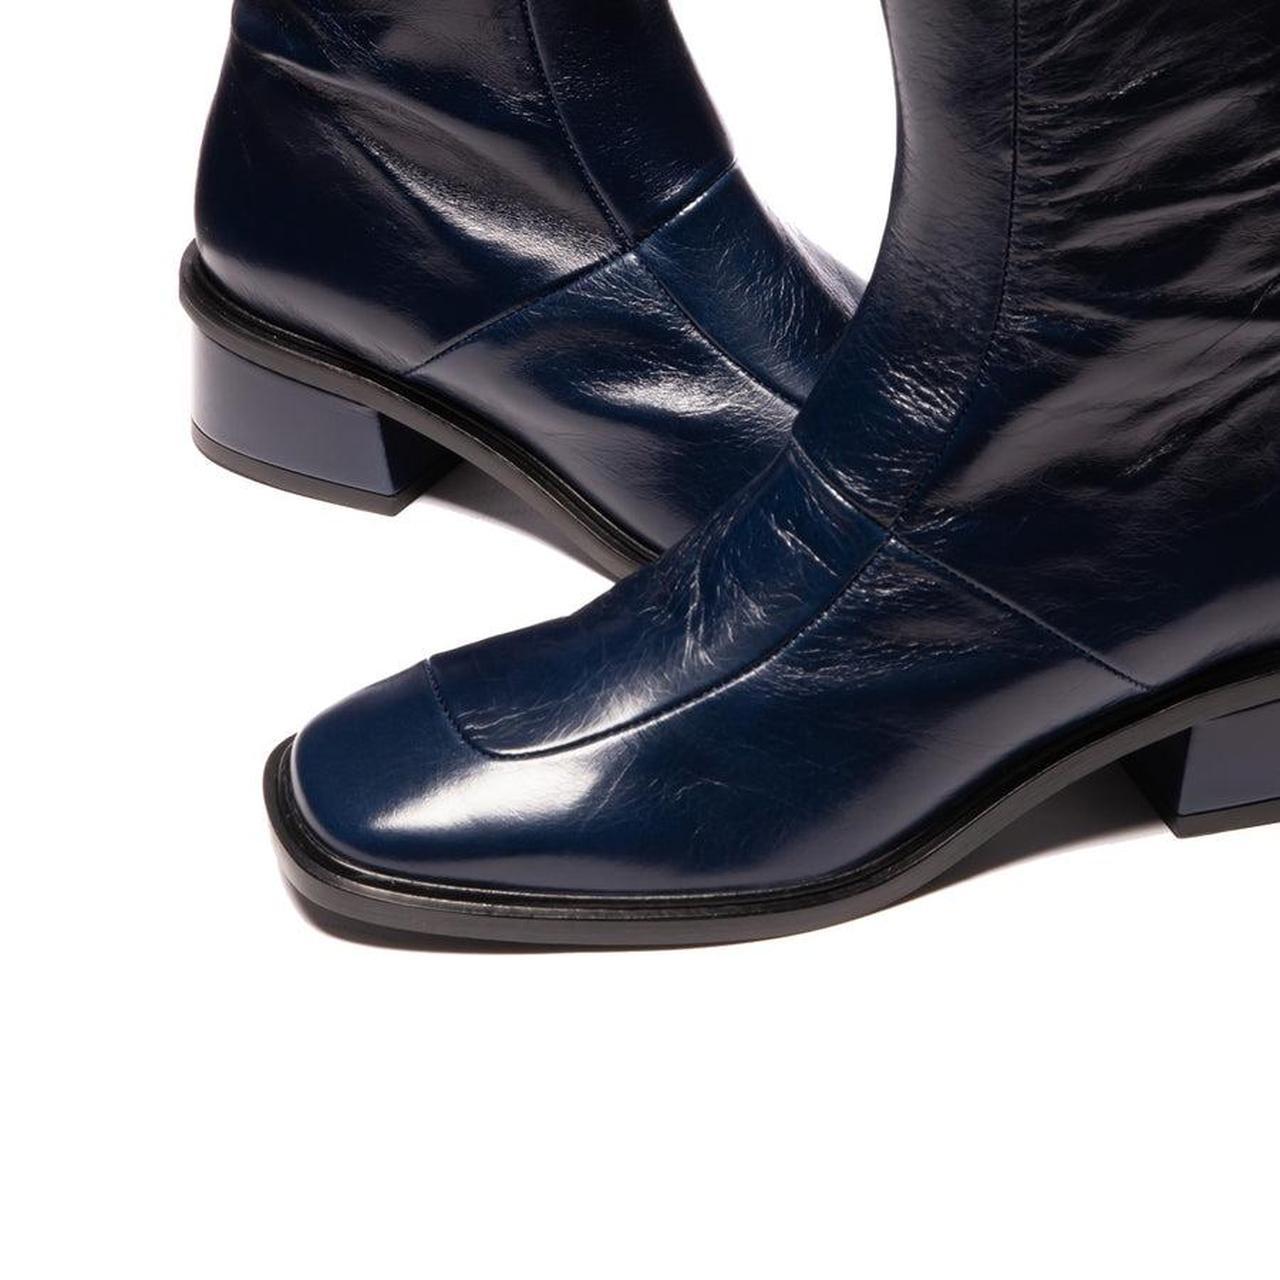 & Other Stories Women's Navy Boots (3)